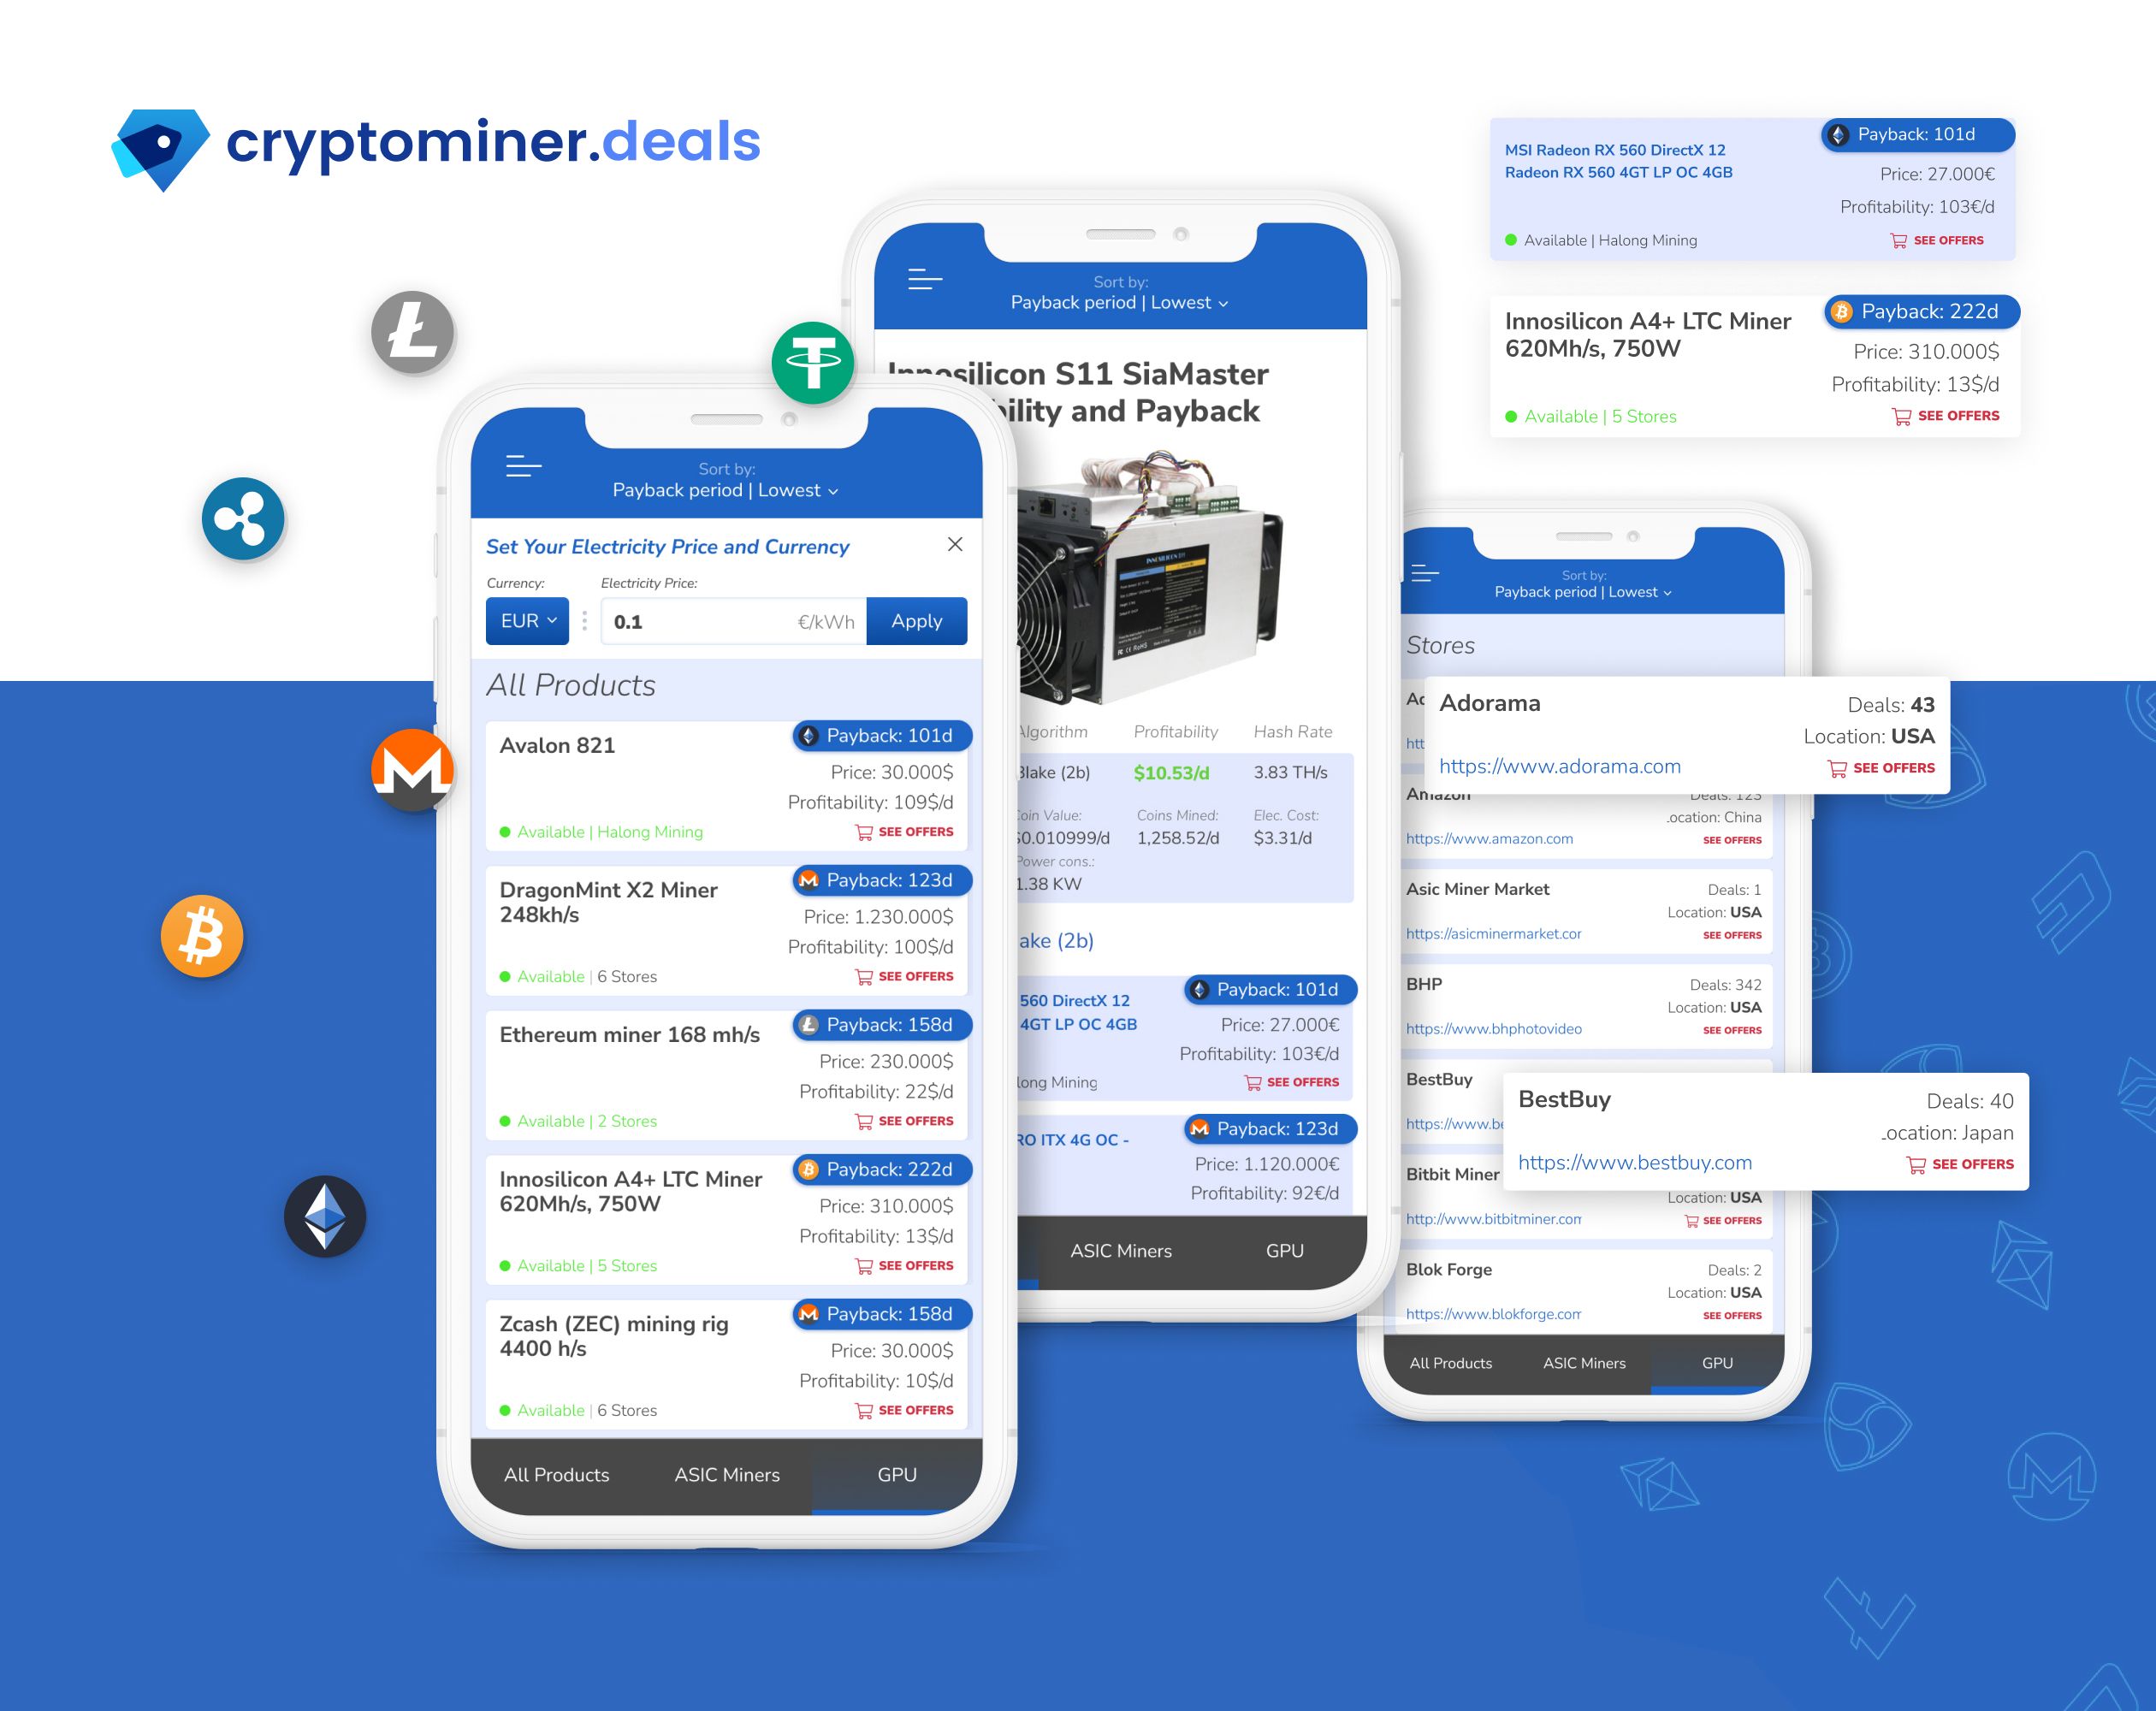 Deals aggregator web application for crypto-mining equipment